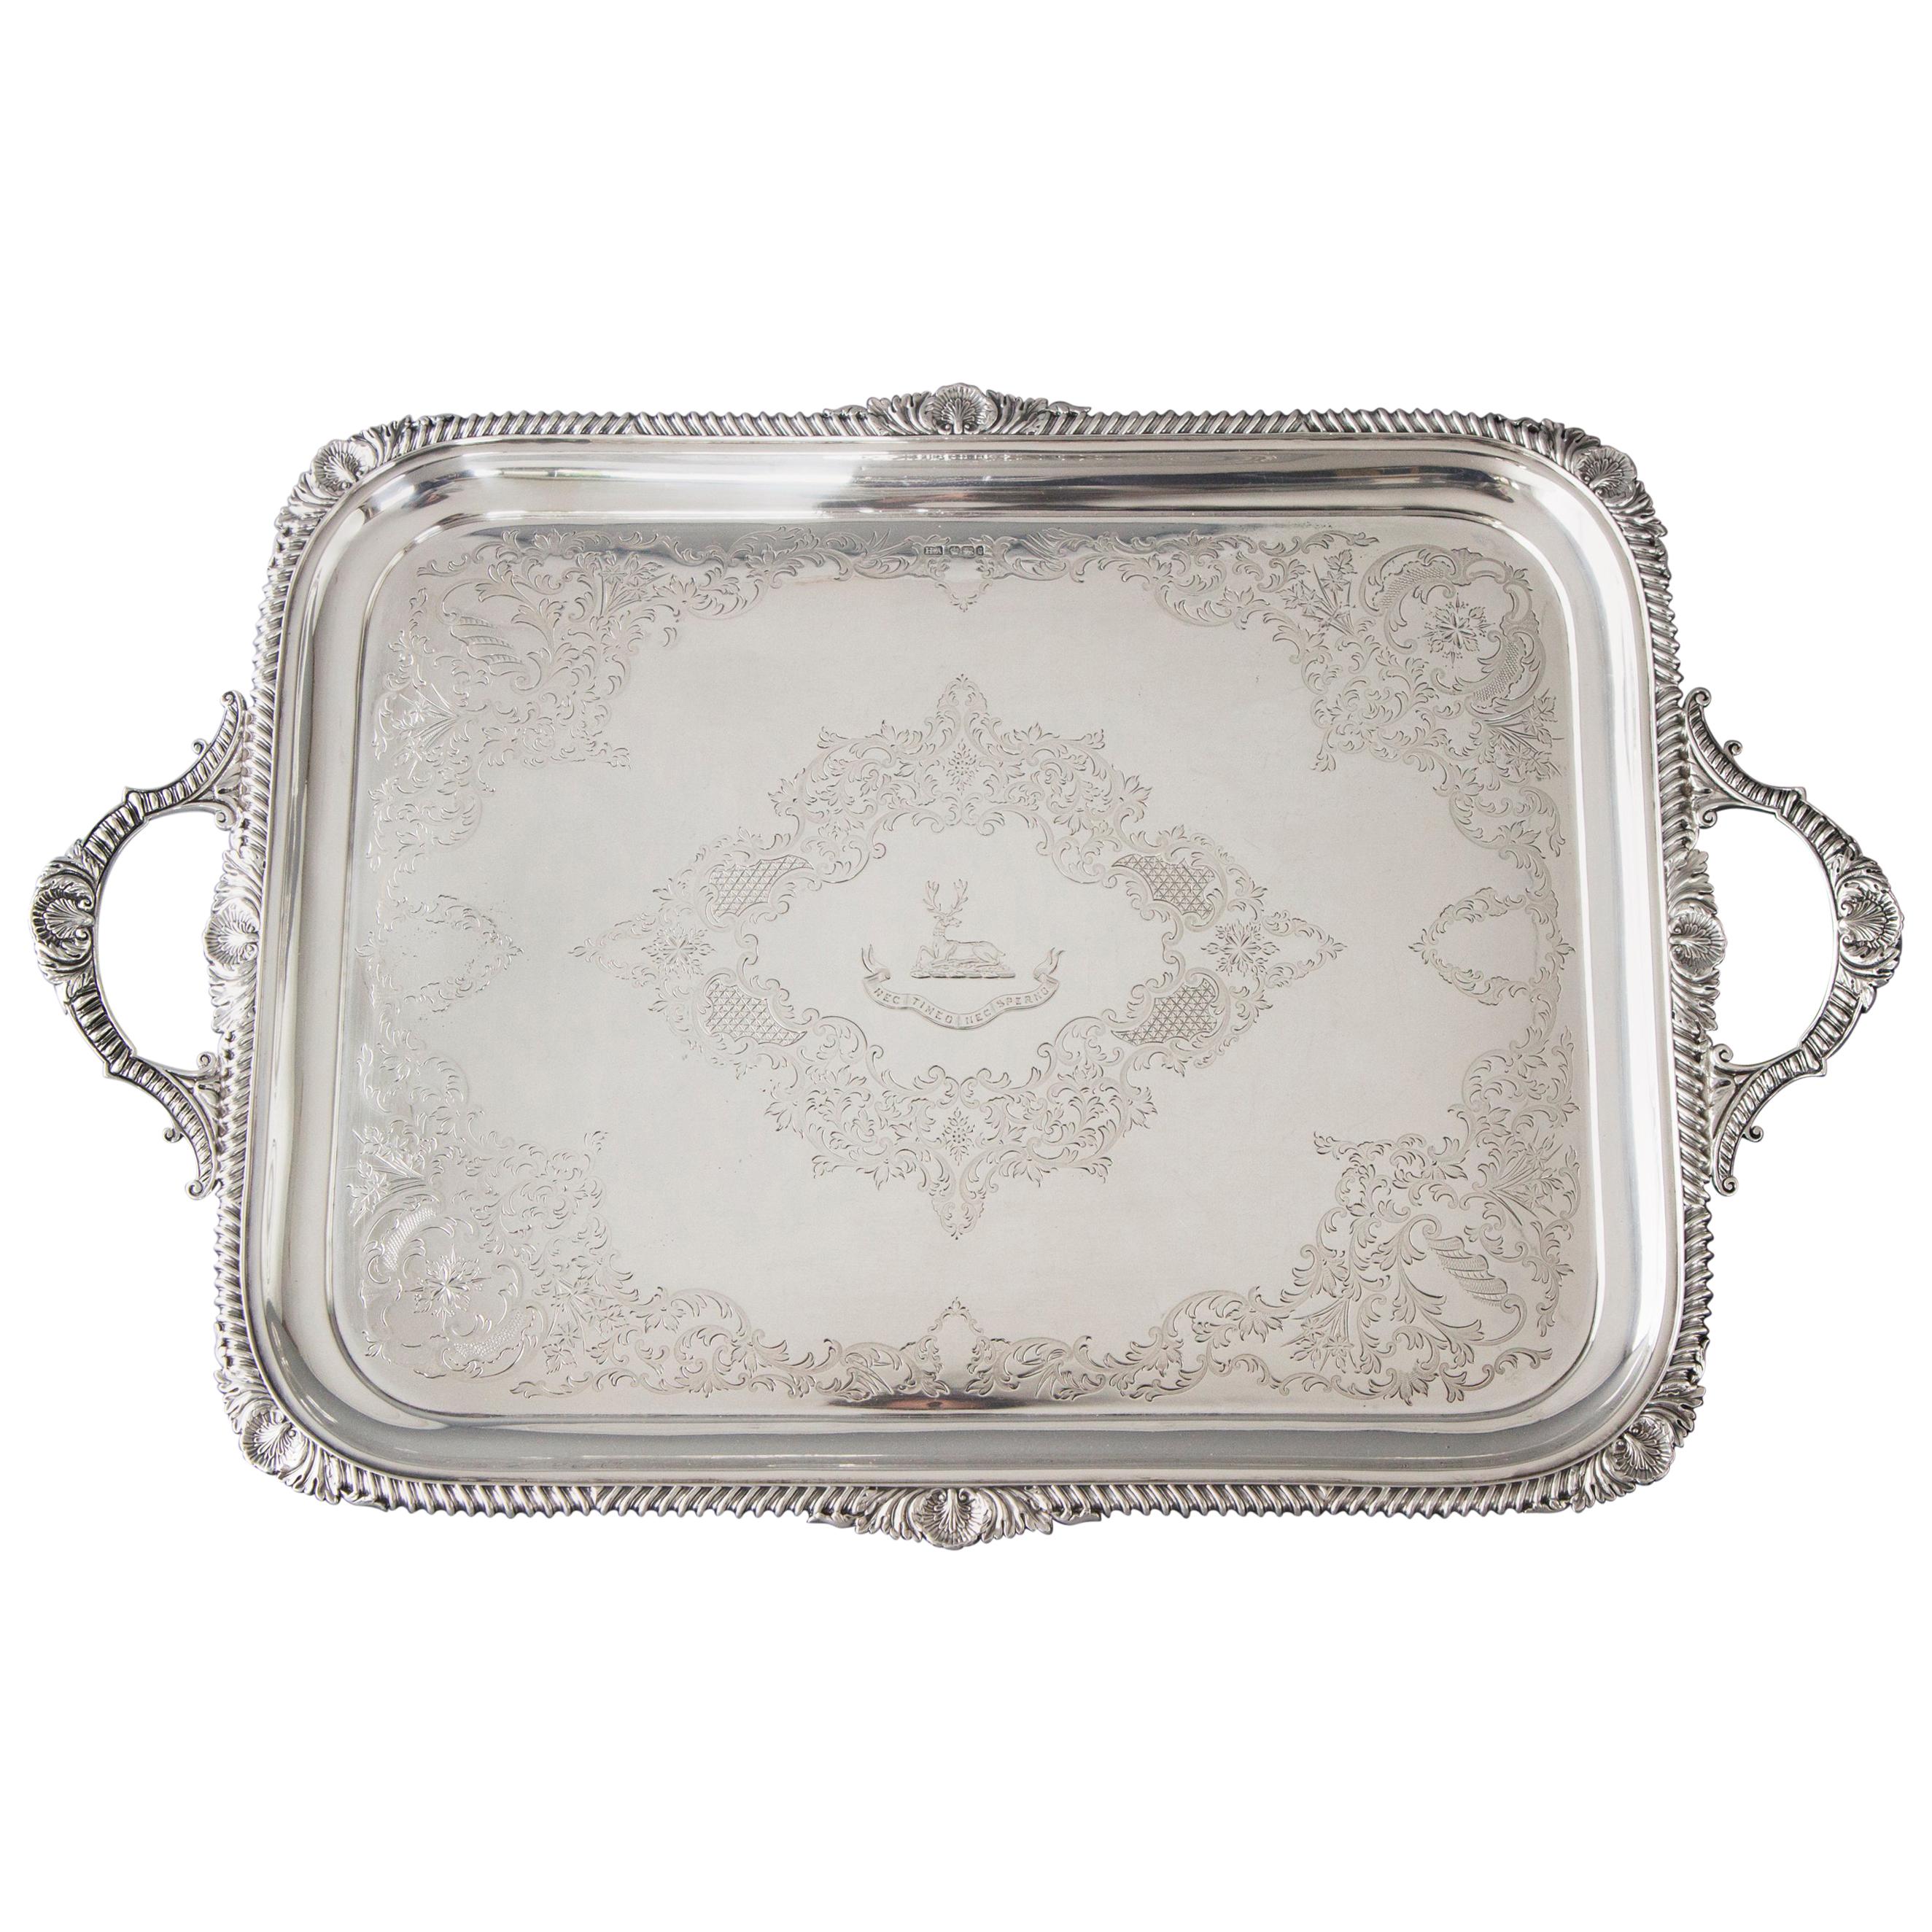 Victorian Silver Tea or Drinks Tray, Sheffield, 1899 by Atkin Brothers